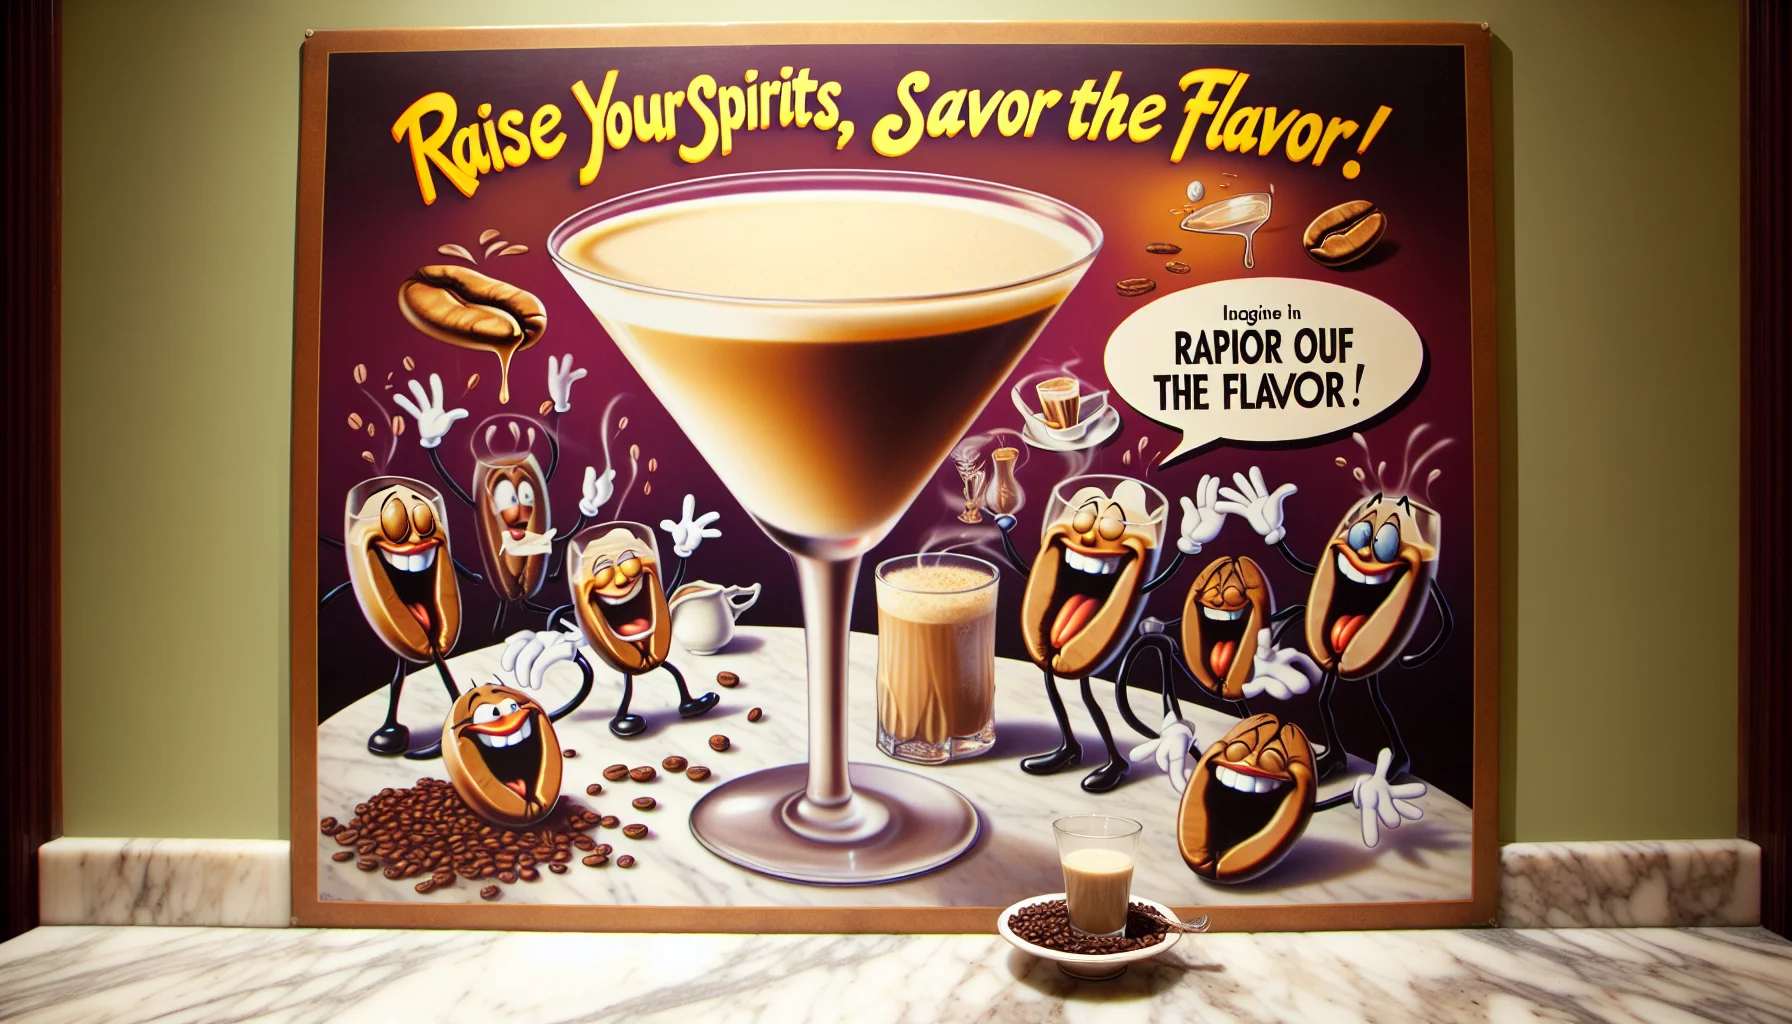 Imagine a humorous scene featuring a creamy espresso martini. Resting on a marbled countertop, the drink is elegantly garnished with coffee beans. The glass from which the exceptional cocktail is served is sweating slightly, testifying to the chill of the drink. The background shows playful depictions of espresso beans and martini glasses, perhaps with cartoonish faces and limbs, laughing and toasting to a good time. A bold banner at the top implores 'Raise your spirits, savor the flavor!', promoting the notion of unwinding in a delightful and playful way. The image thrives in a warm, inviting atmosphere, urging folks to revel in the joy of this delectable cocktail.